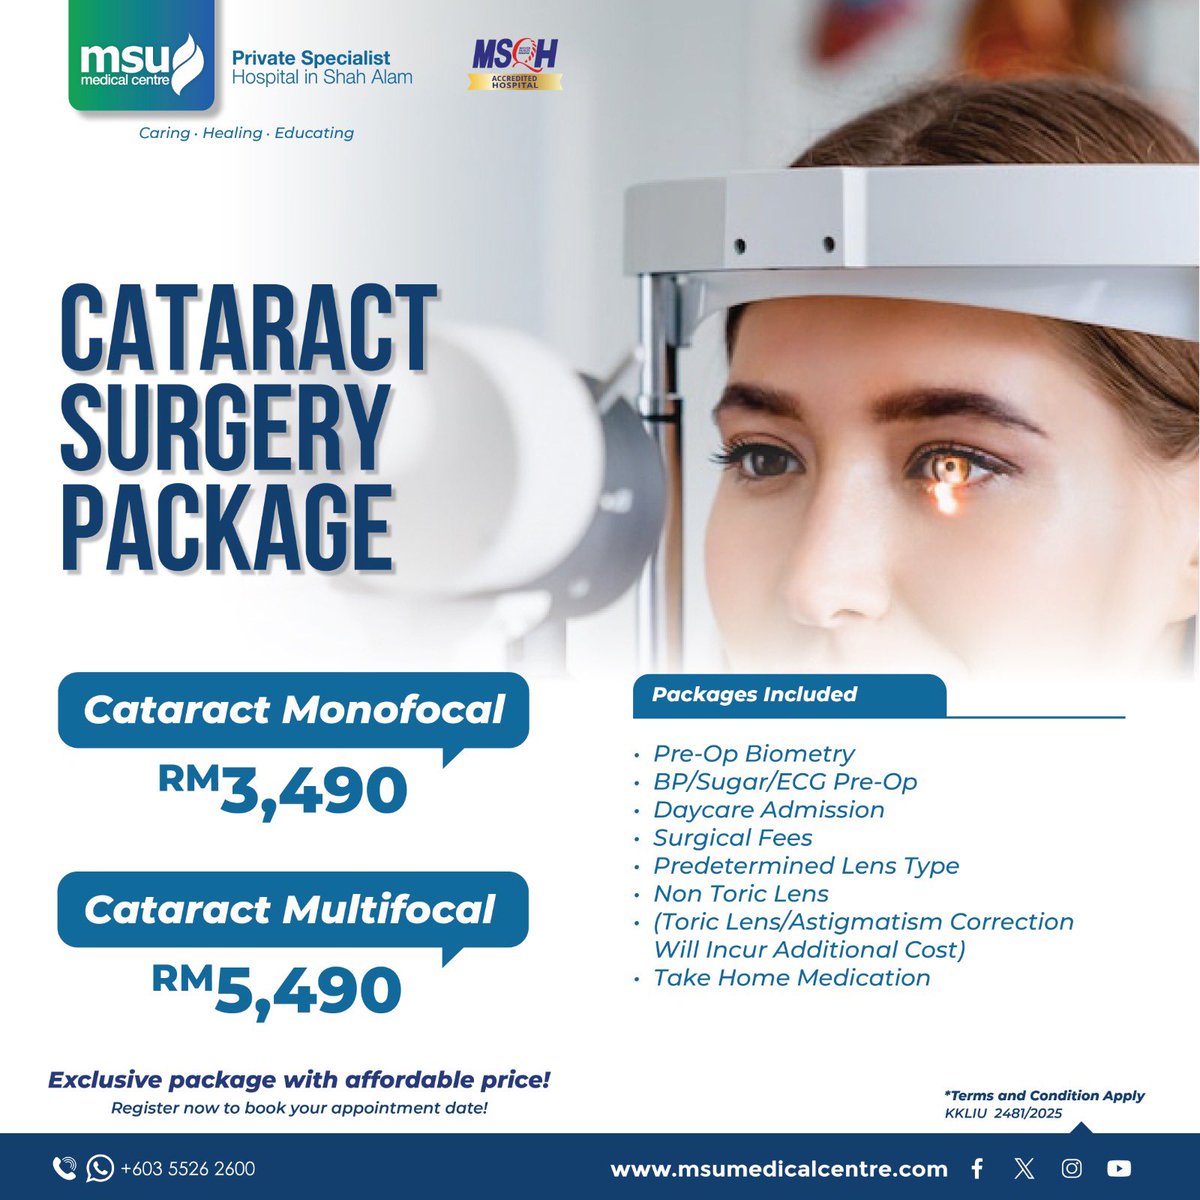 Revive their vision and share the joy. Sign up now for our cataract package! Allow your loved one to enjoy the beautiful moment. For more information, visit msumedicalcentre.com or call 03-55262600. #CaringHealingEducating #MSUMC #cataract